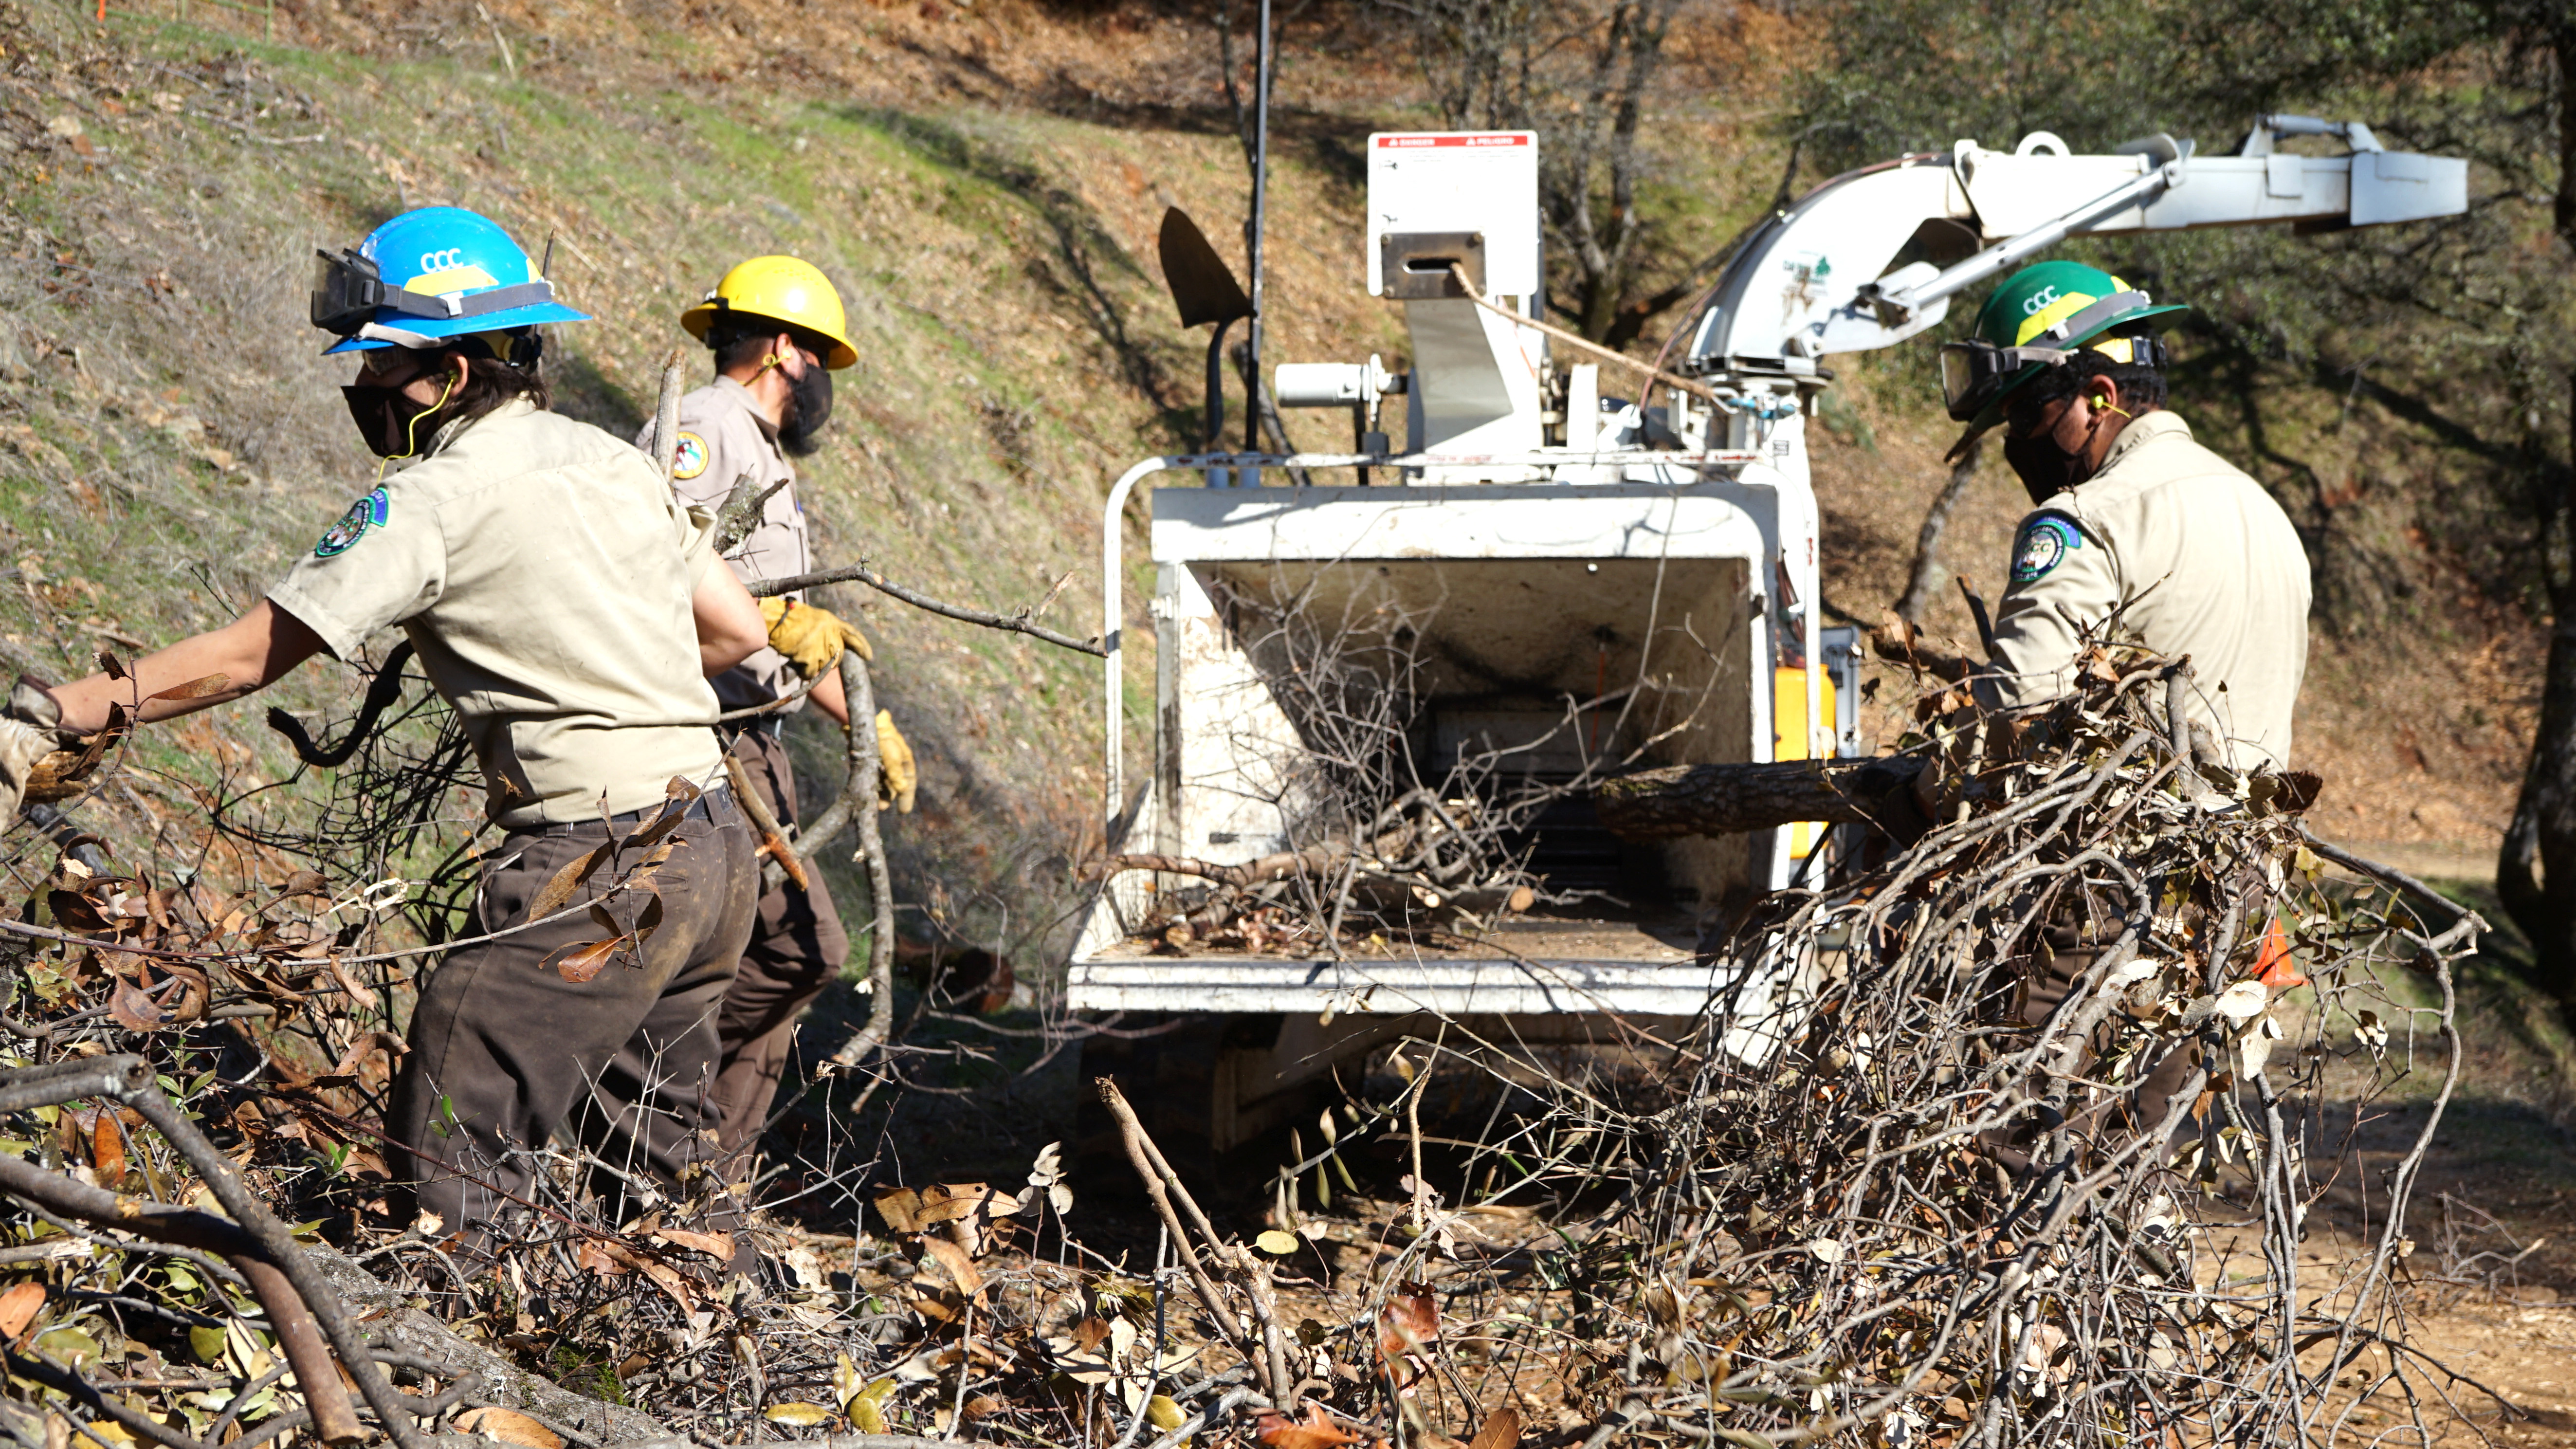 Corpsmembers pull branches from debris pile and haul them toward a wood chipper in the background of image